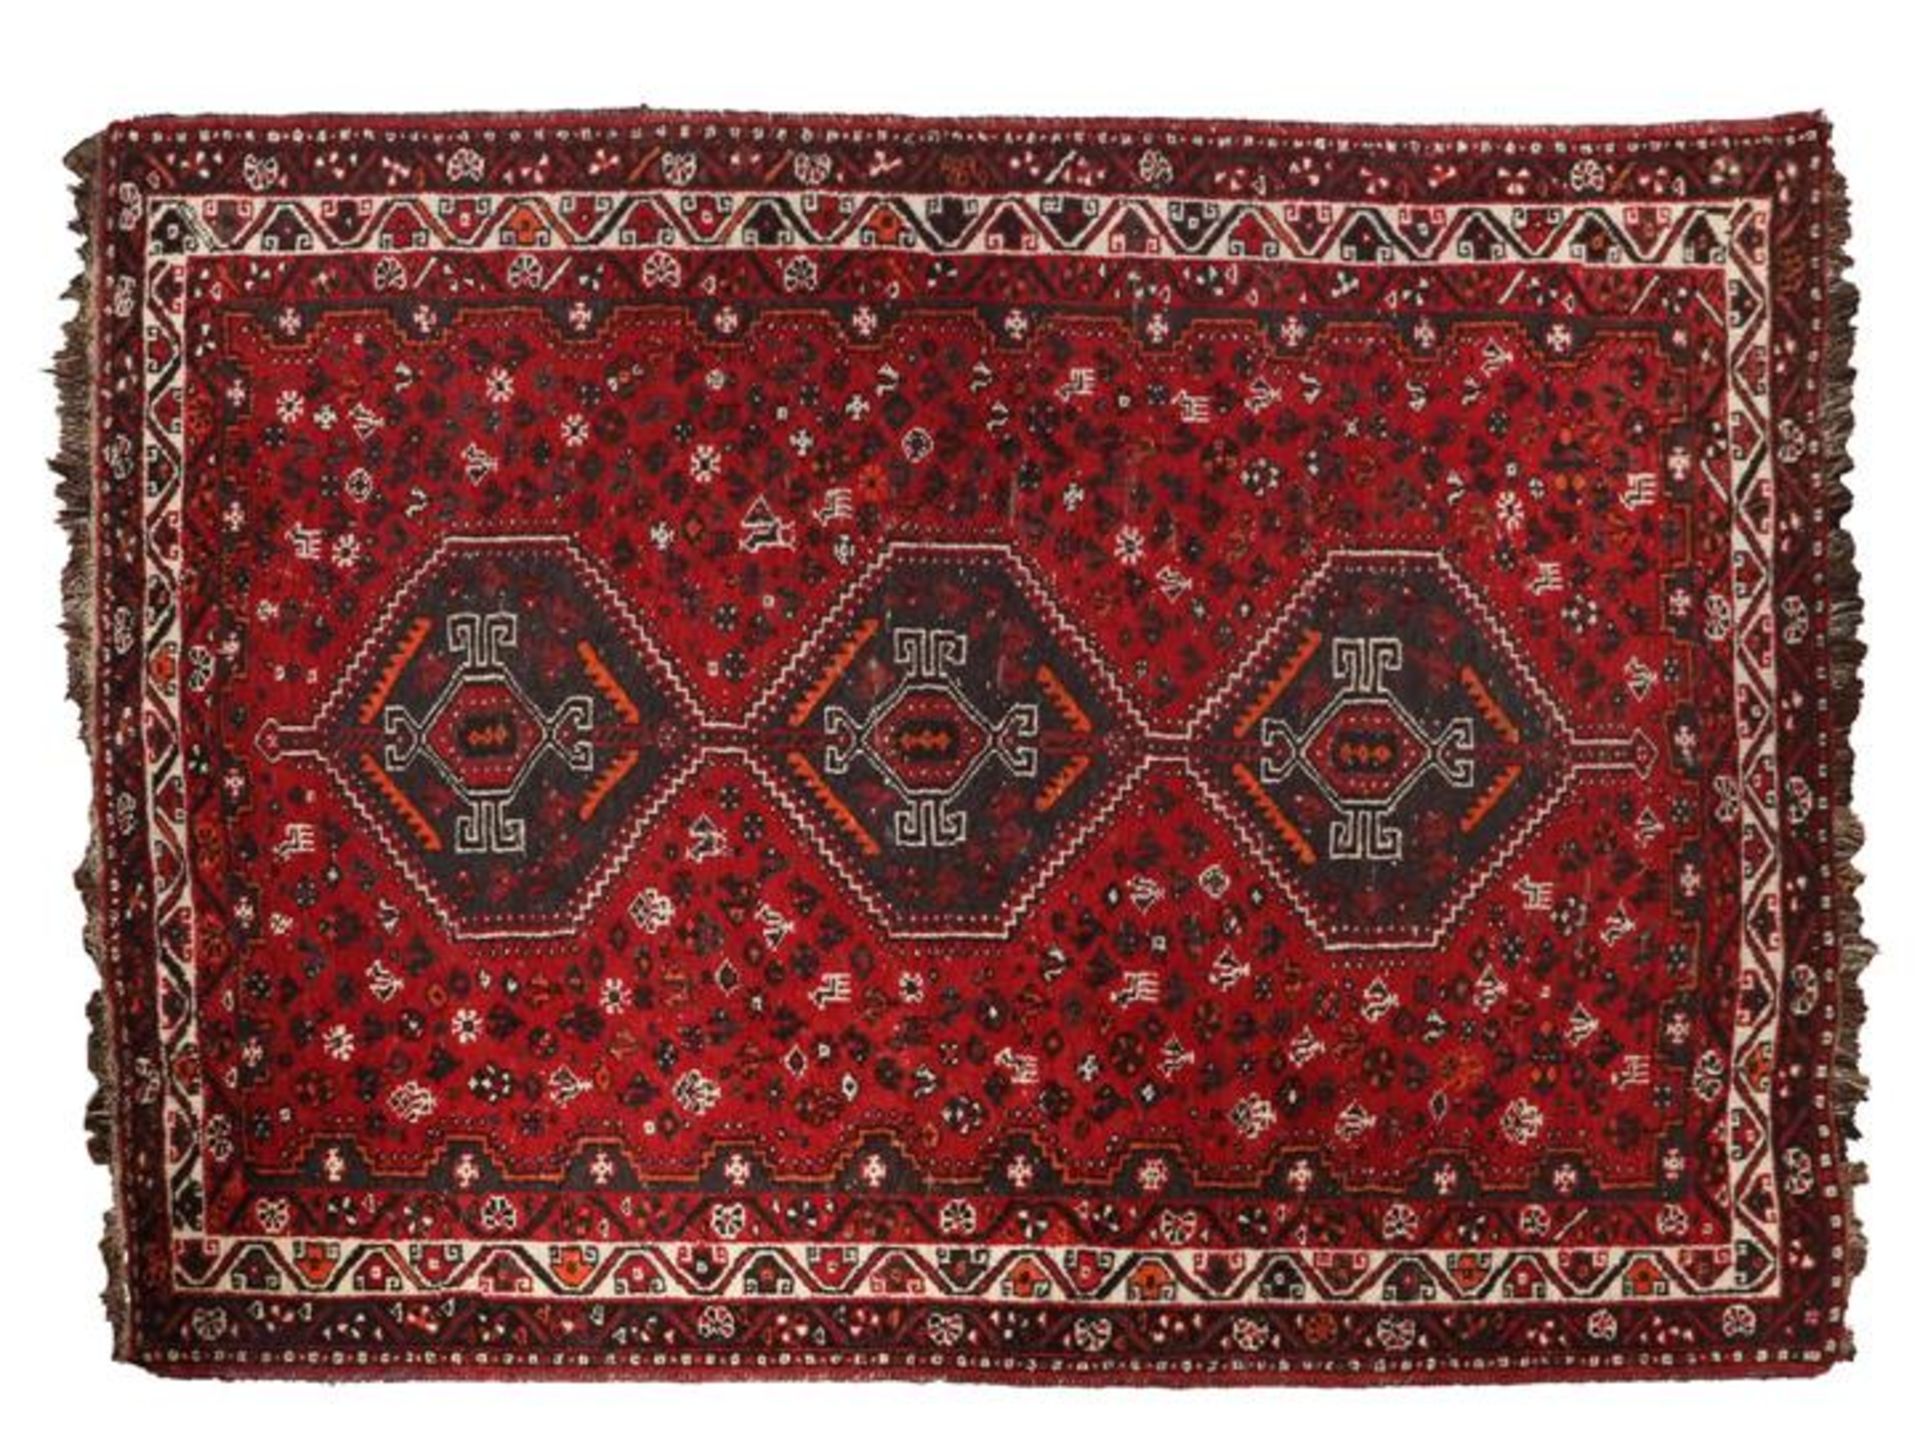 Oriental hand-knotted carpet 297x195 cm